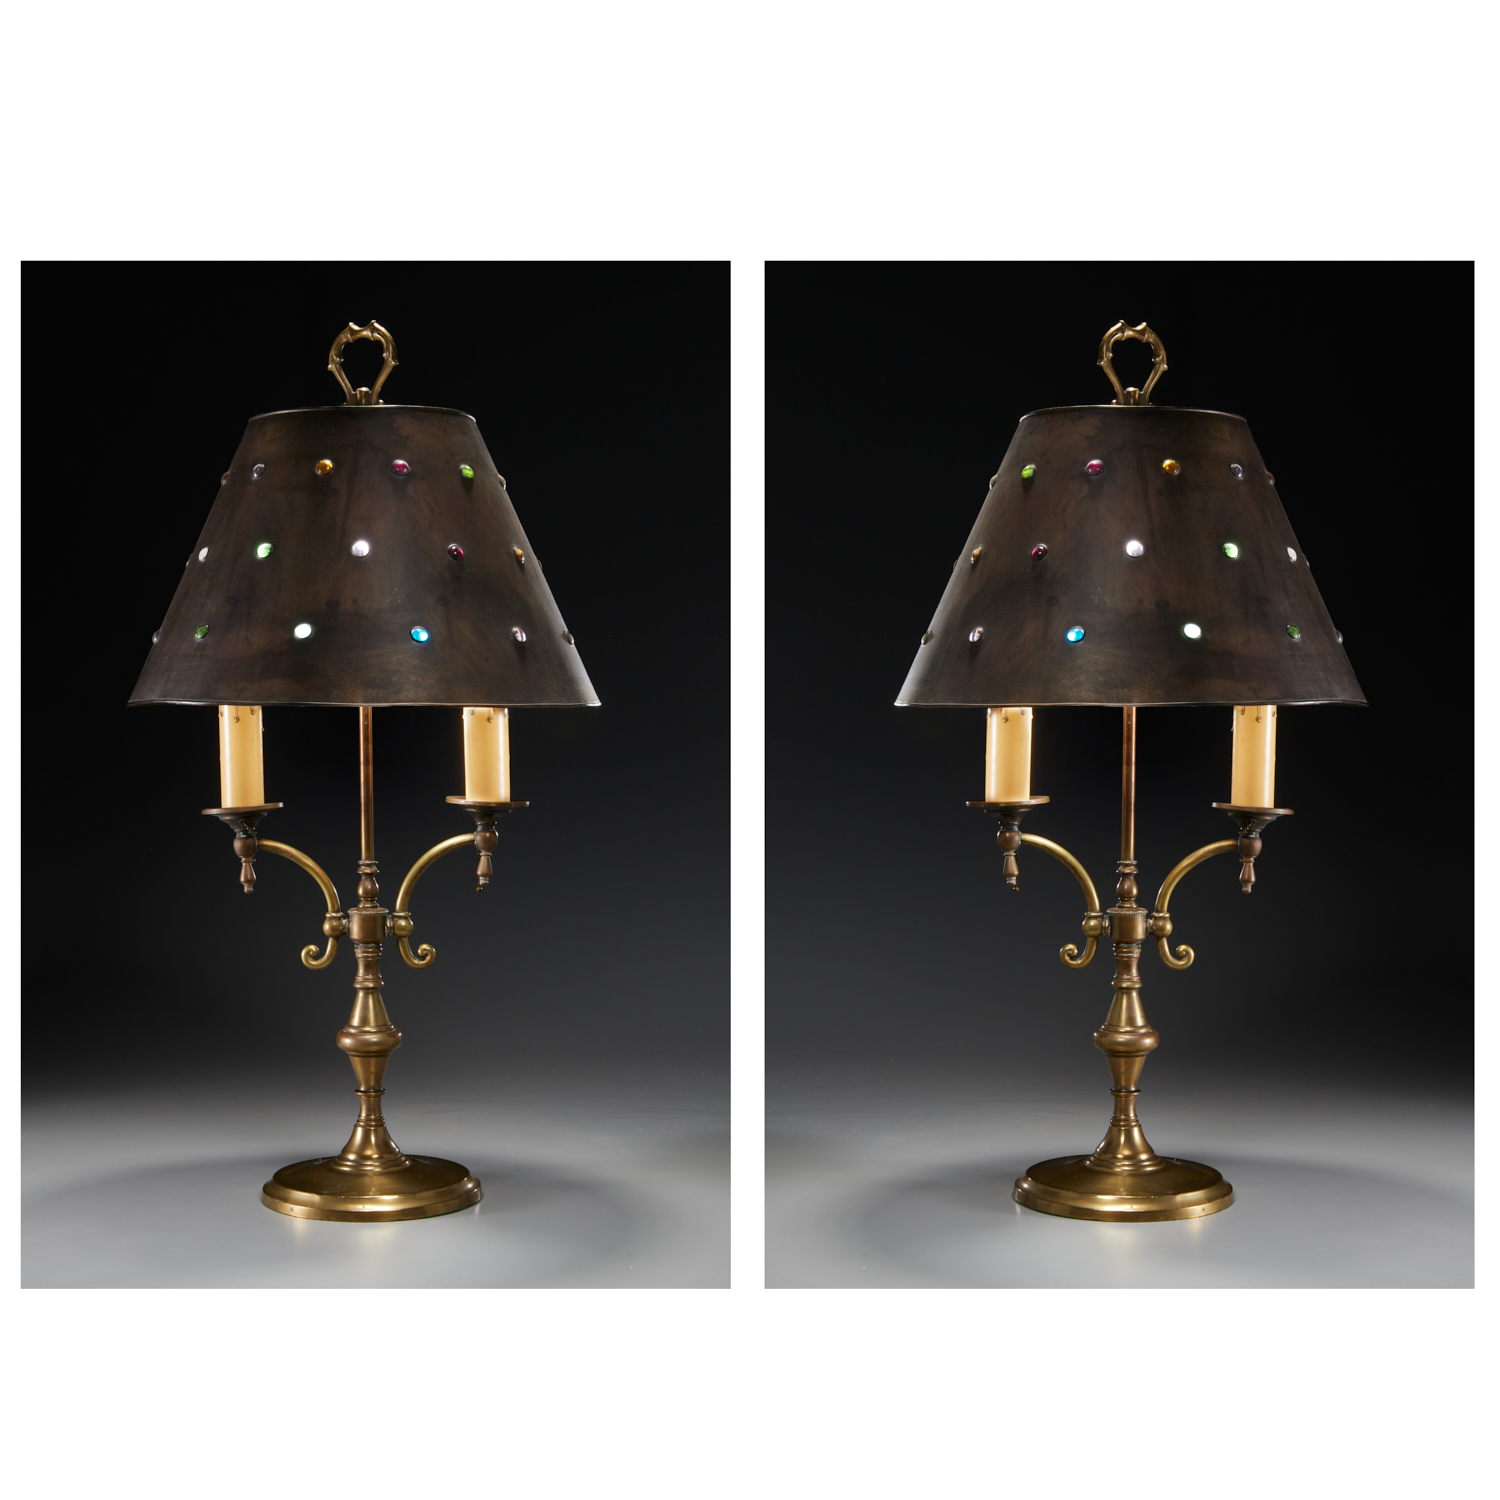 CHIC PAIR CANDELABRA LAMPS, JEWELED